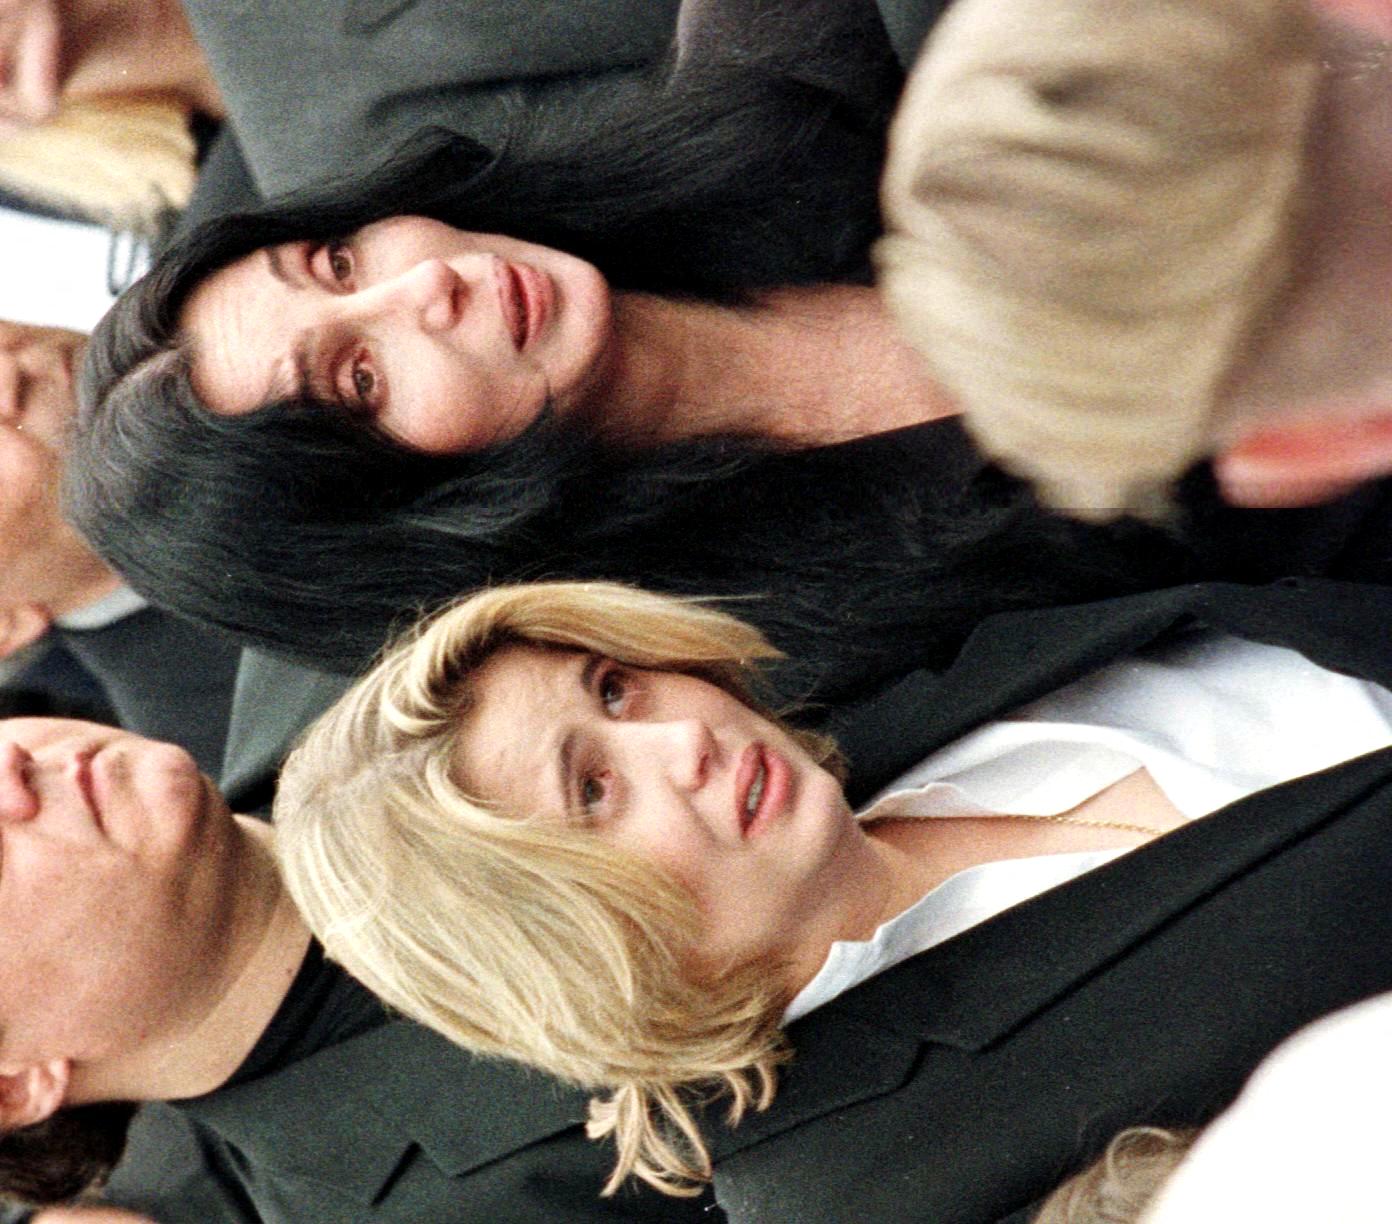 Cher attends her ex-husband Sonny Bono's funeral service with their daughter Chastity on January 9, 1998 in Palm Springs, California | Source: Getty Images